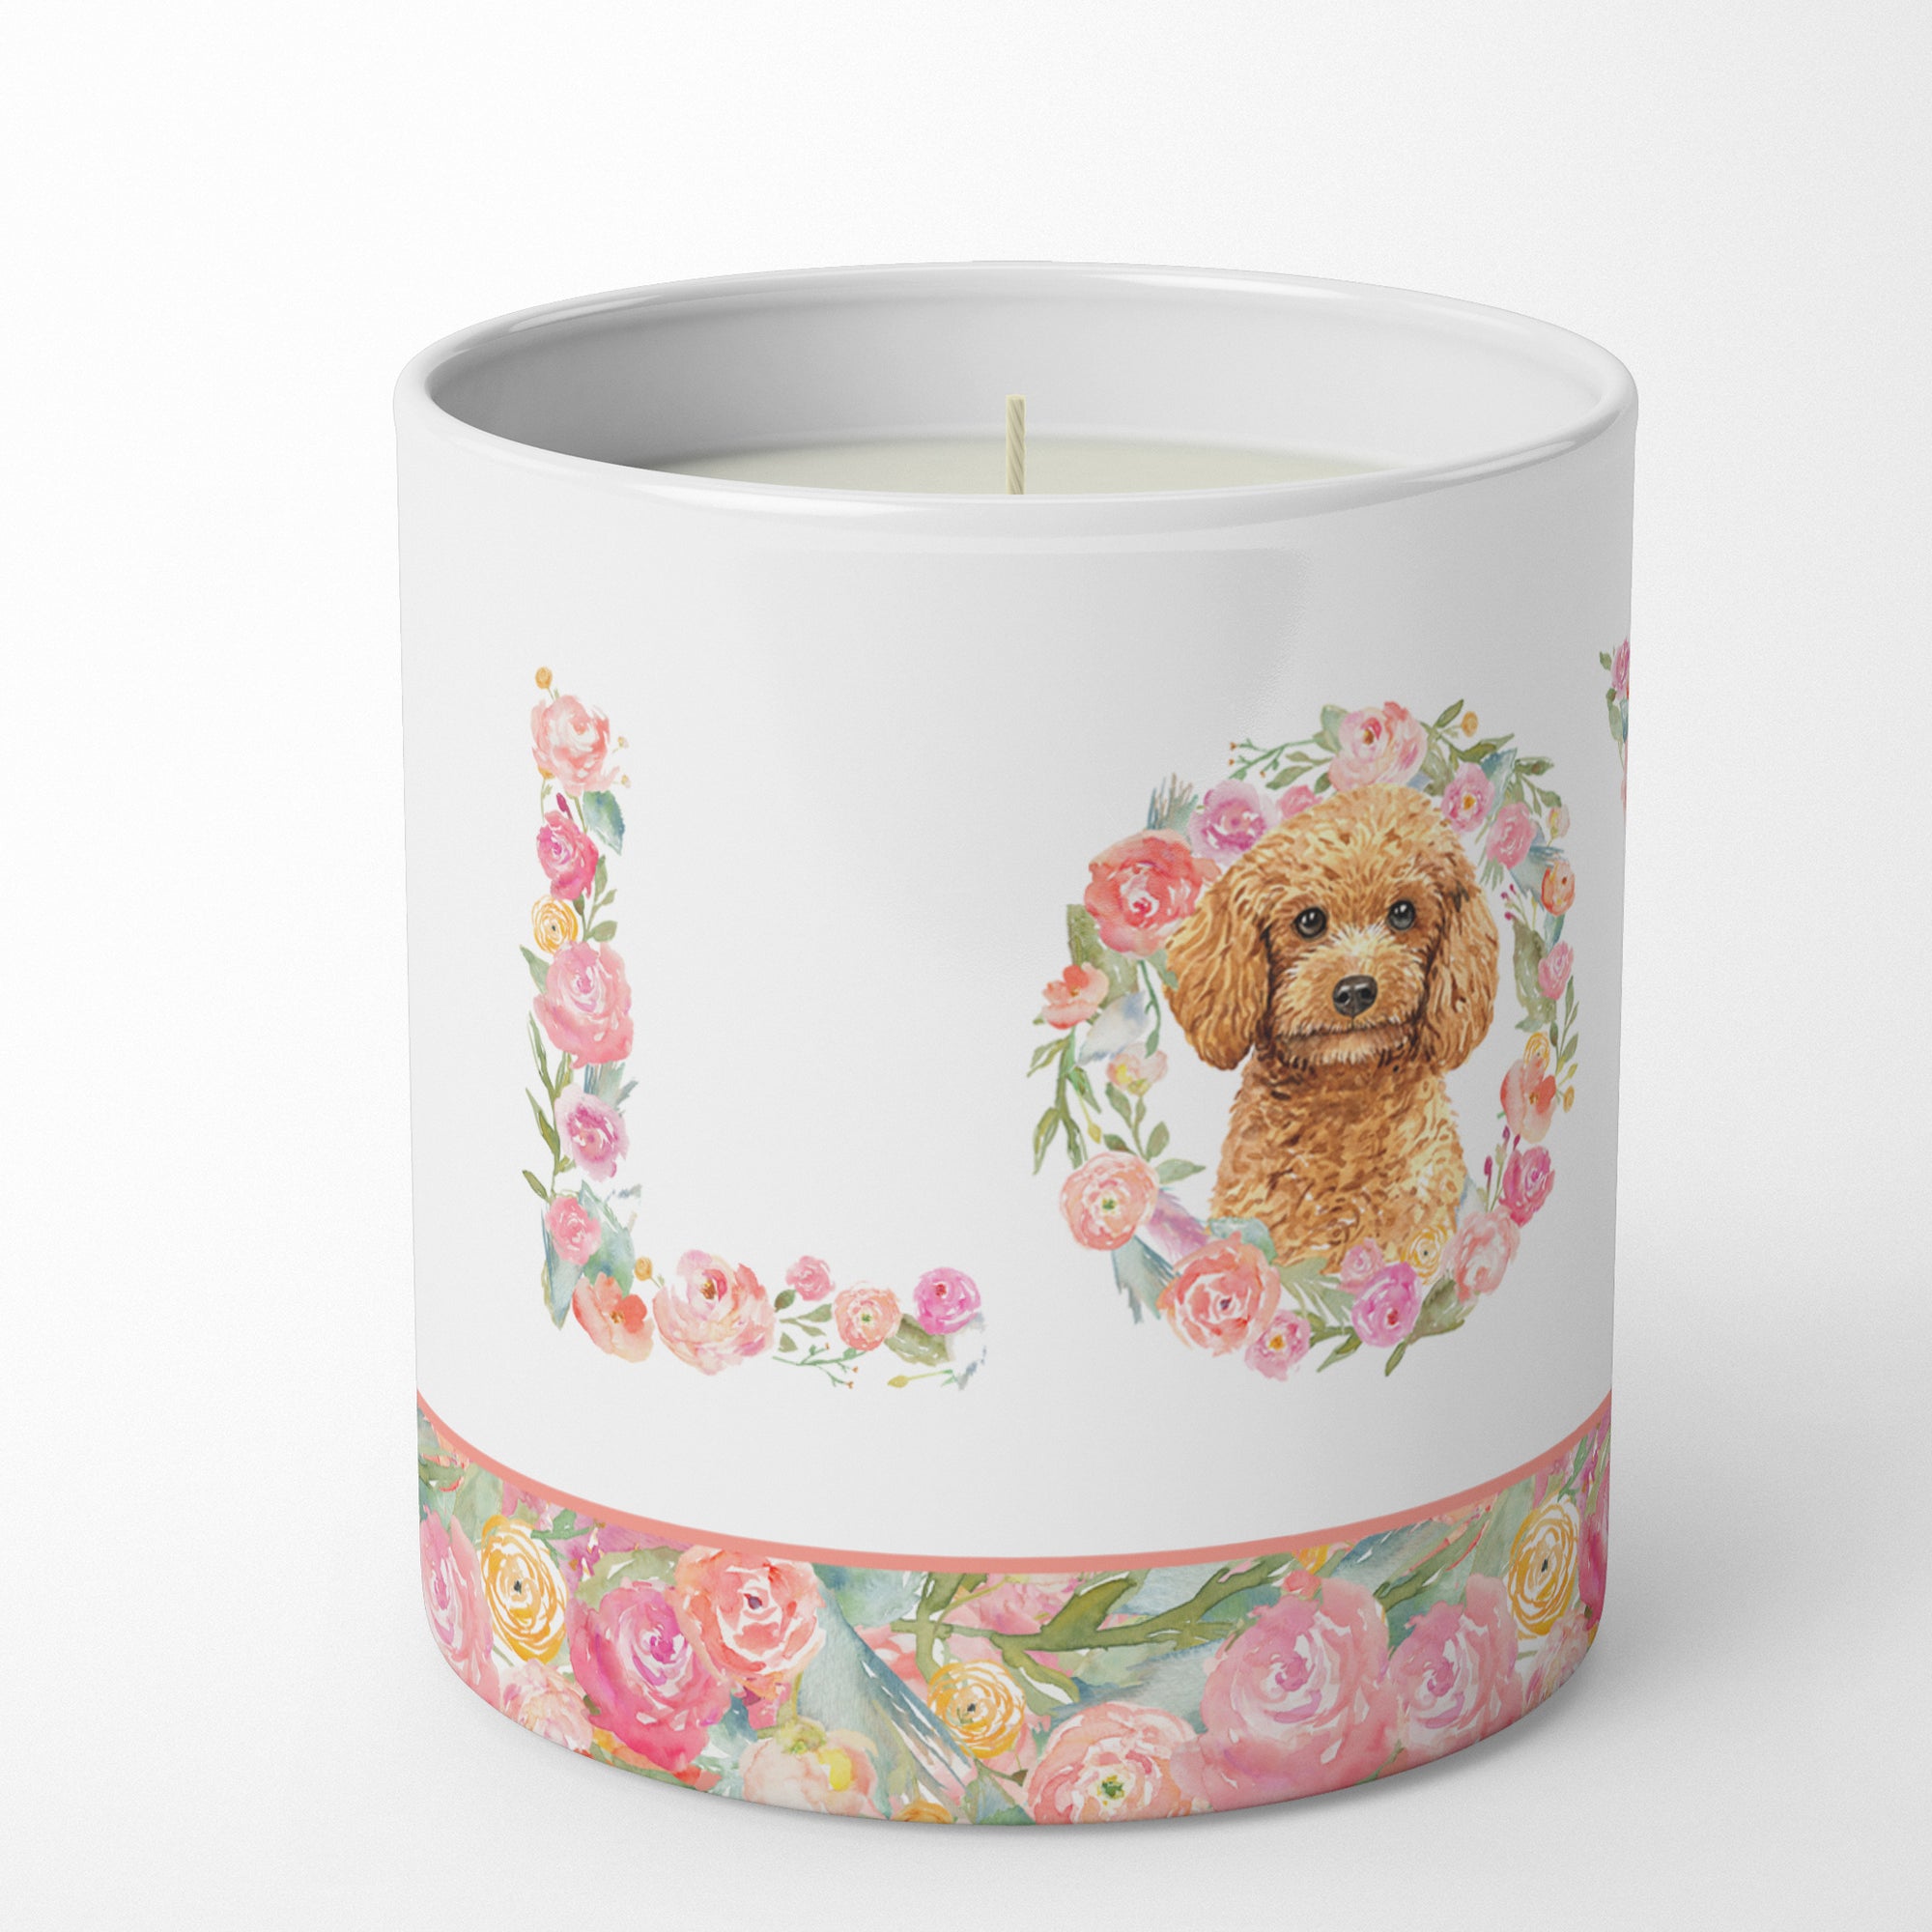 Buy this Poodle Love 10 oz Decorative Soy Candle